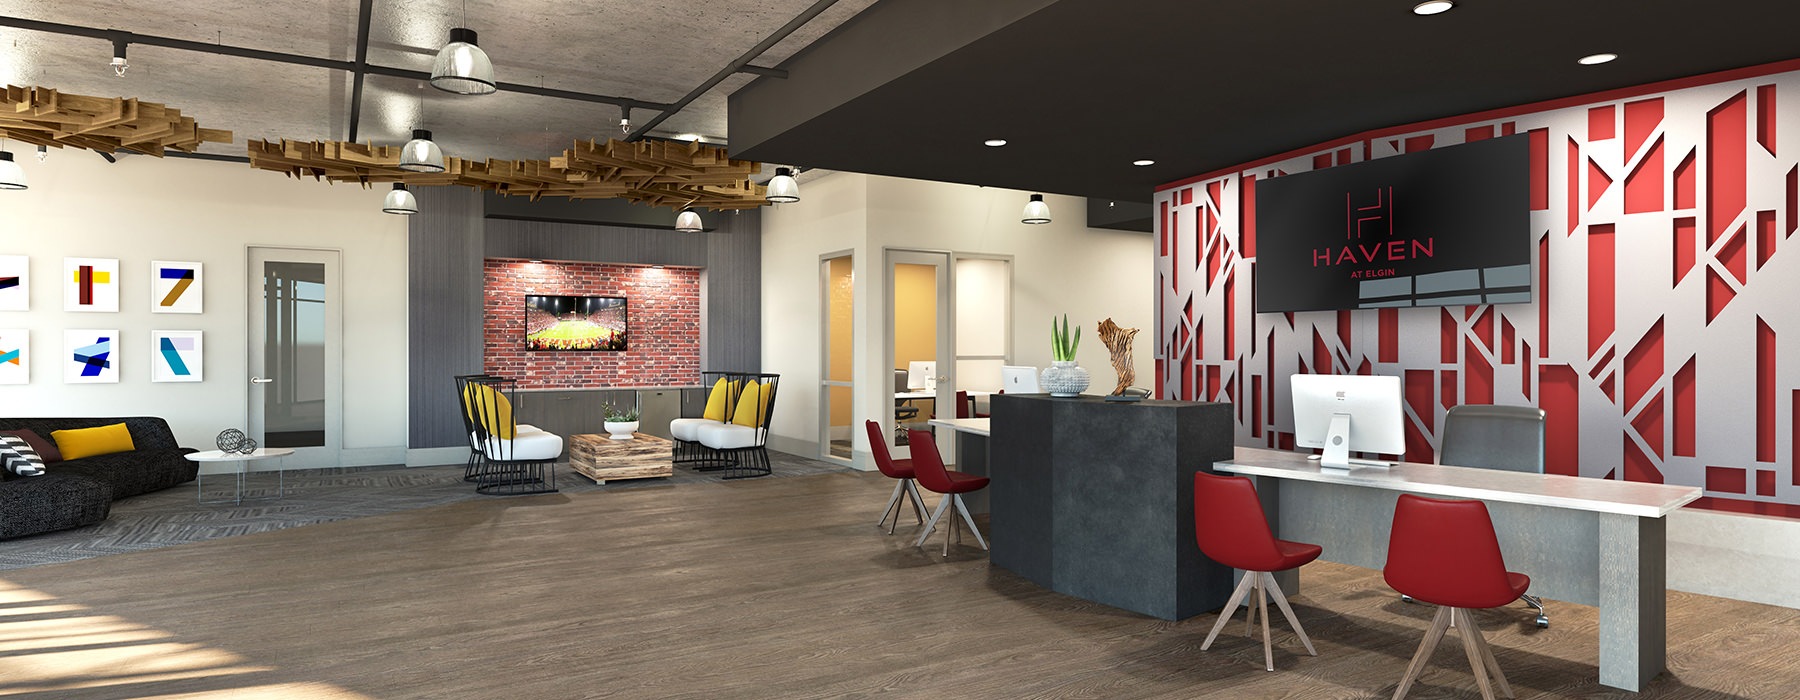 rendering of lobby with colorful walls and modern decor